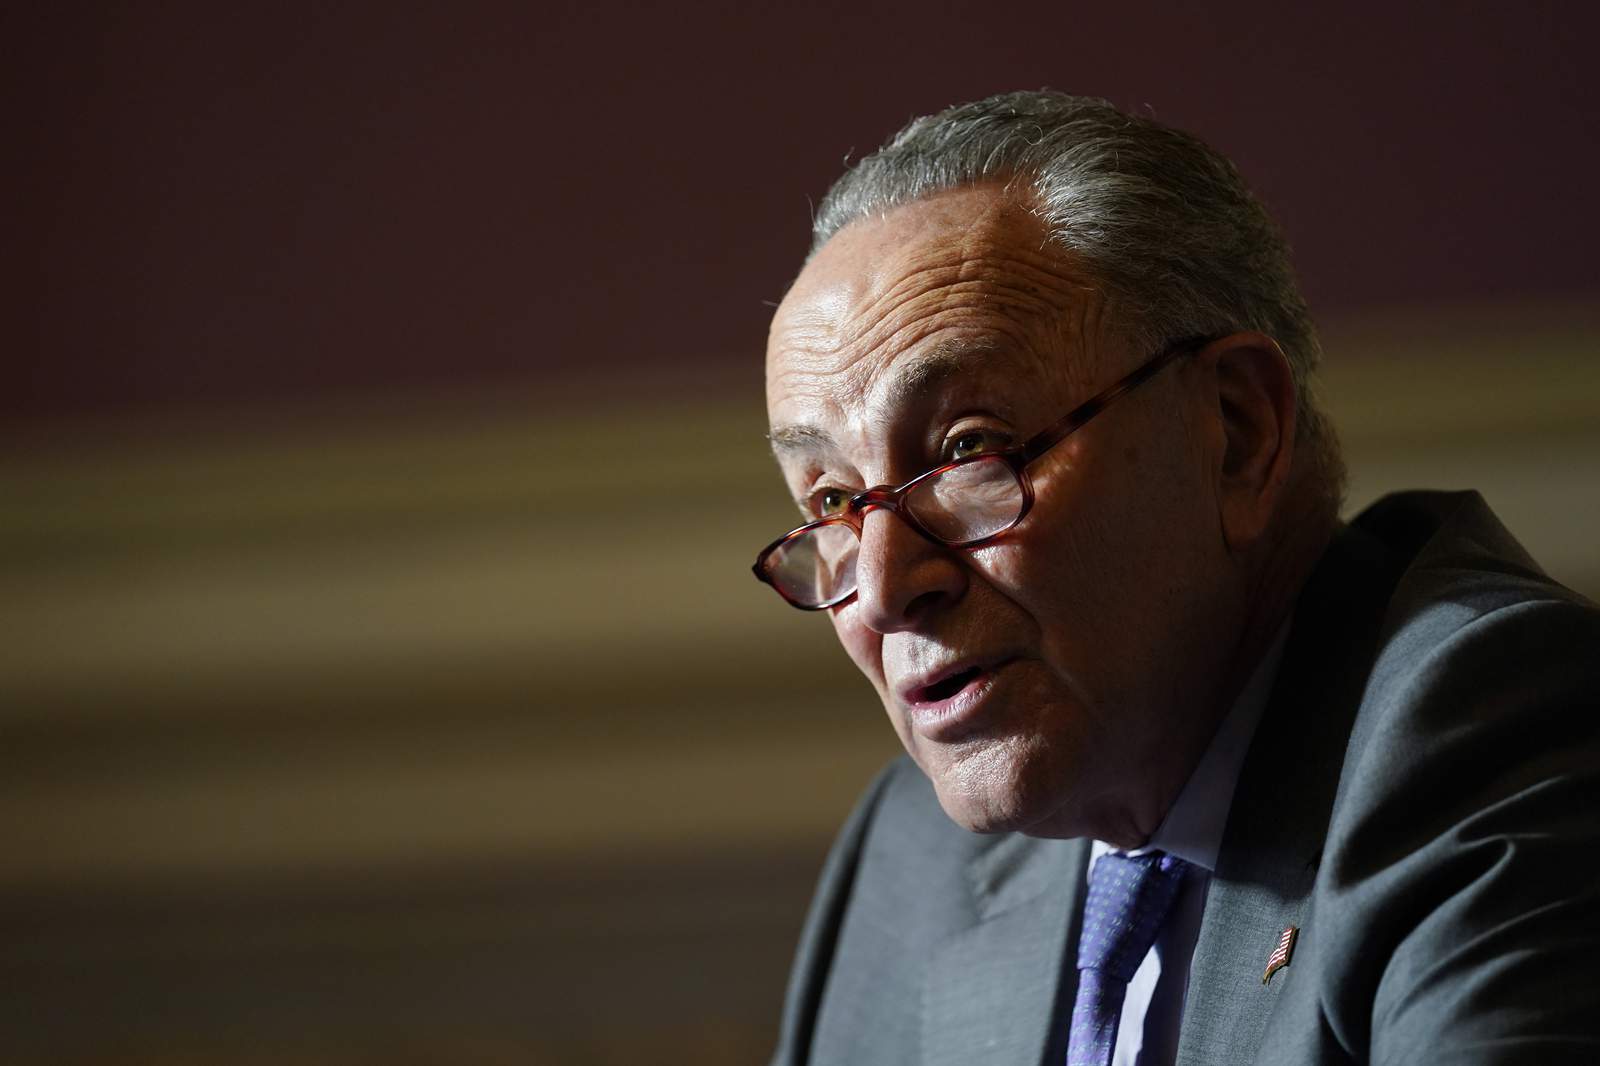 Schumer calls for immediate removal of President Trump by way of 25th Amendment